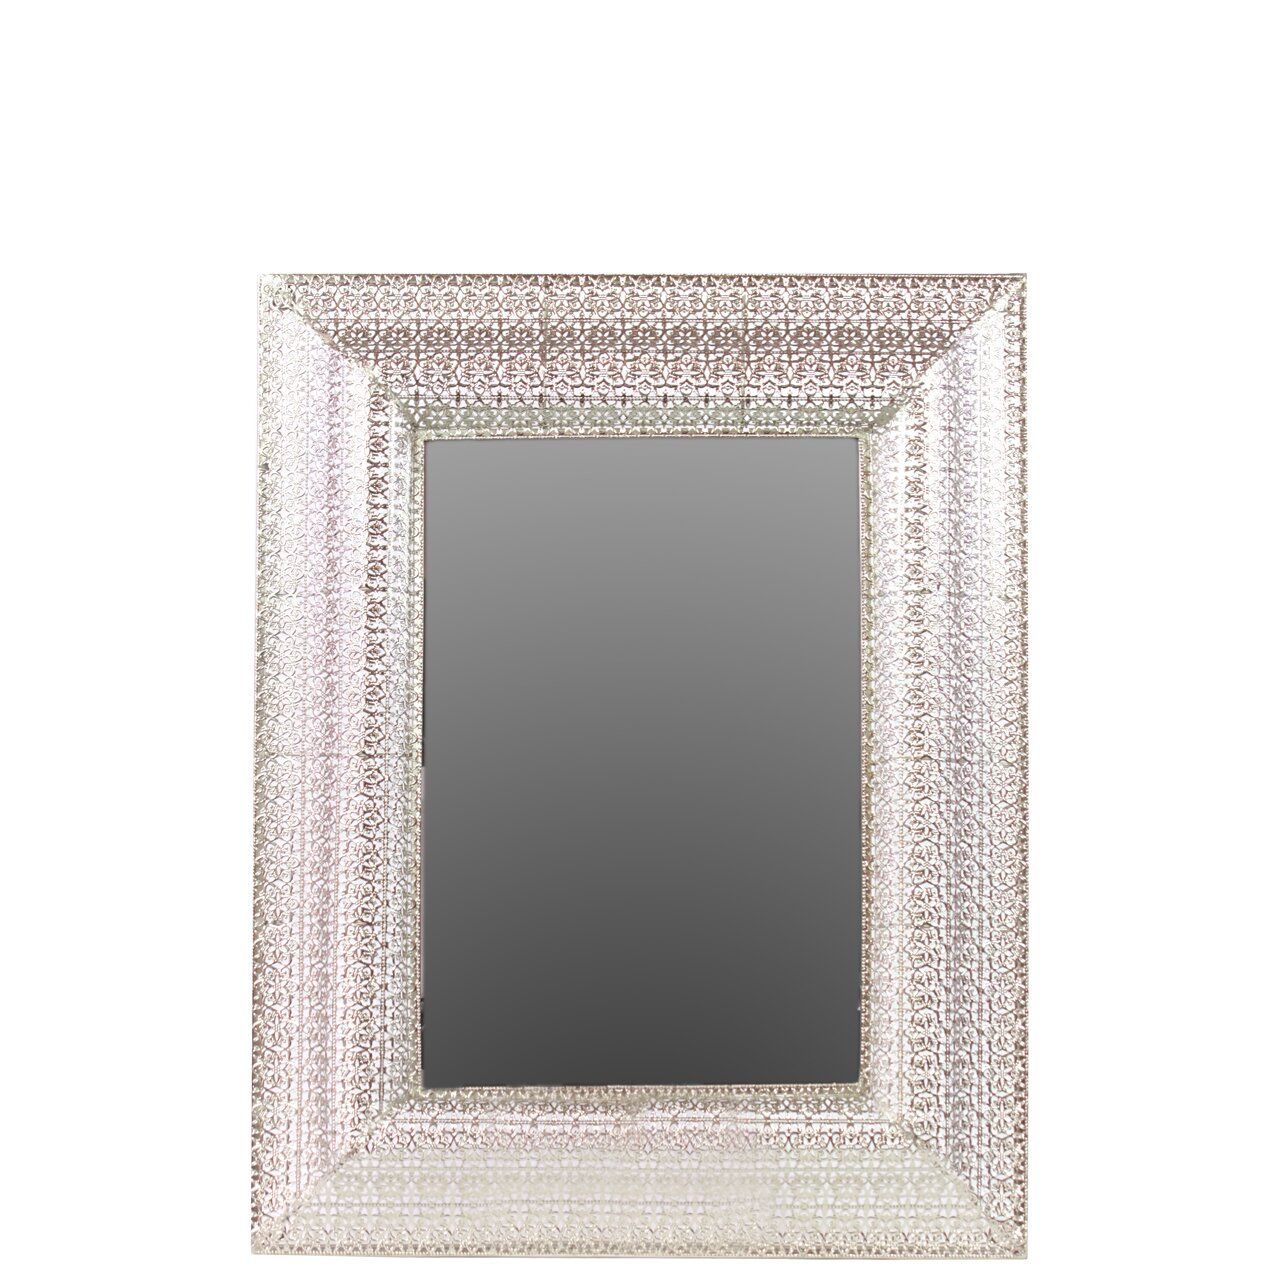 Metal Wall Mirror Pierced Polished Silver | Wayfair For Metallic Silver Wall Mirrors (View 6 of 15)